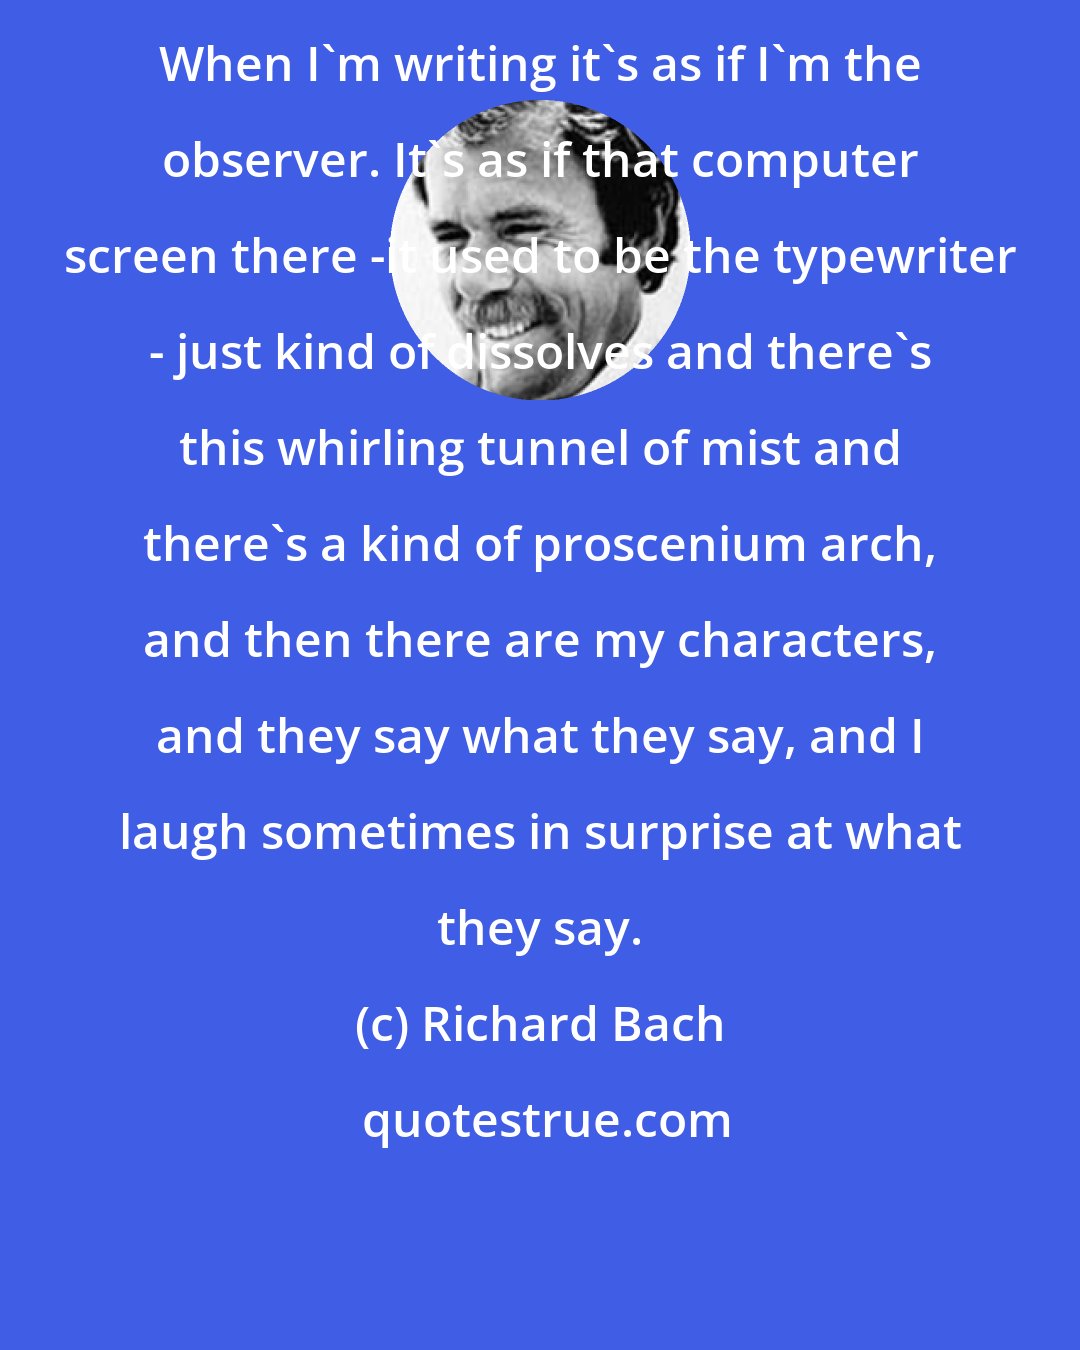 Richard Bach: When I'm writing it's as if I'm the observer. It's as if that computer screen there -it used to be the typewriter - just kind of dissolves and there's this whirling tunnel of mist and there's a kind of proscenium arch, and then there are my characters, and they say what they say, and I laugh sometimes in surprise at what they say.